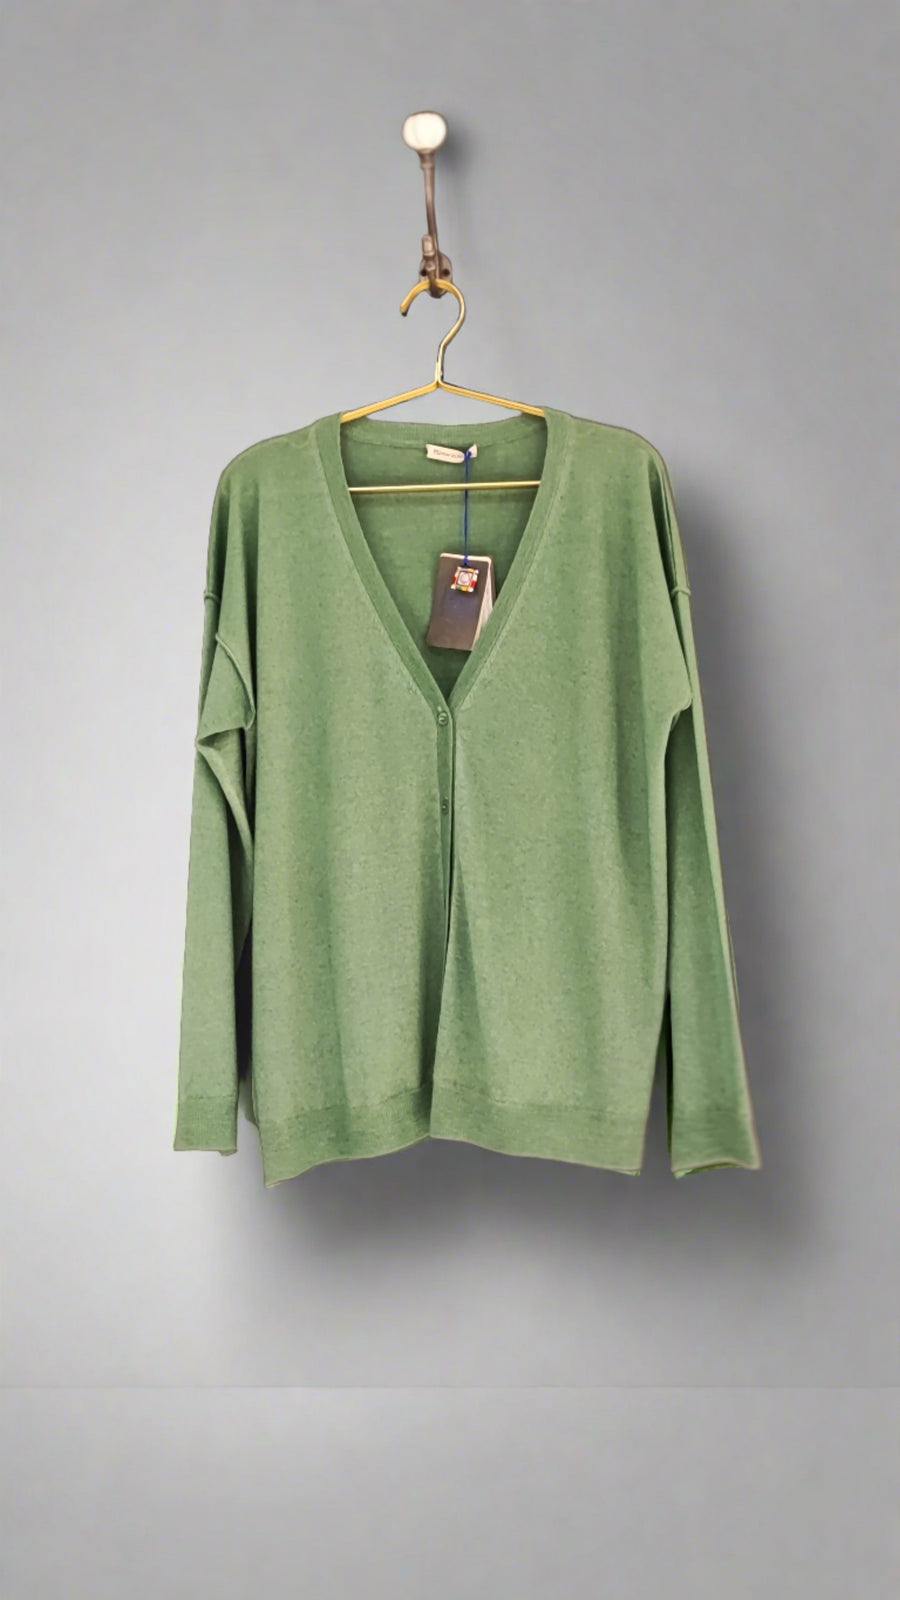 MIRROR IN THE SKY FINE KNIT CASHMERE CLASSIC CARDIGAN IN SPINACH